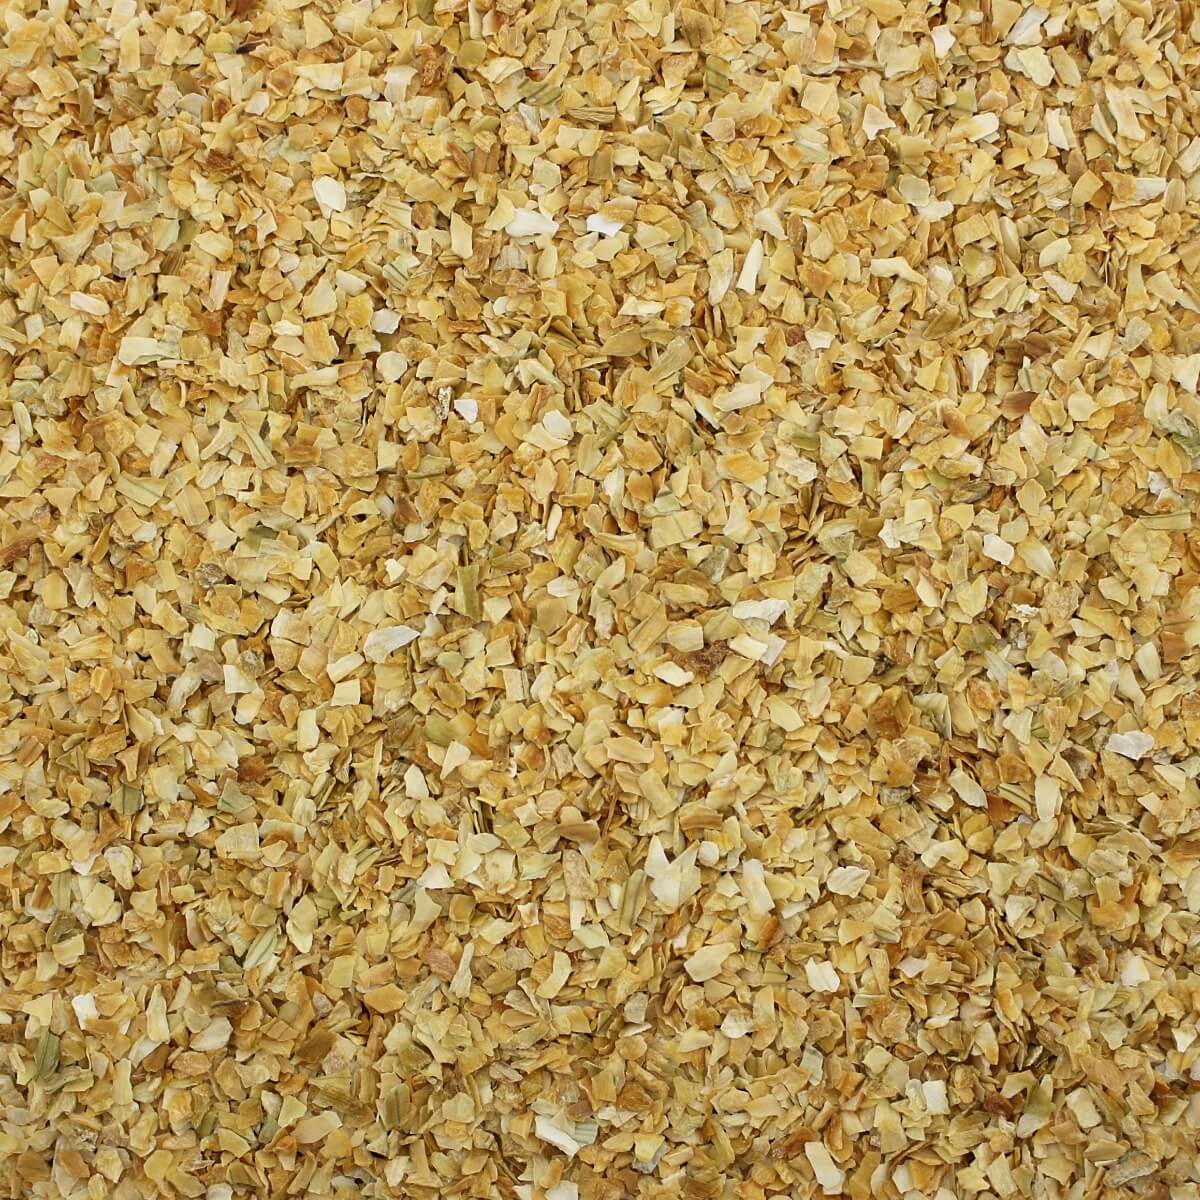 A close up image of a pile of brown granules from the Harmony House Organic Vegetable Pantry Stuffer.